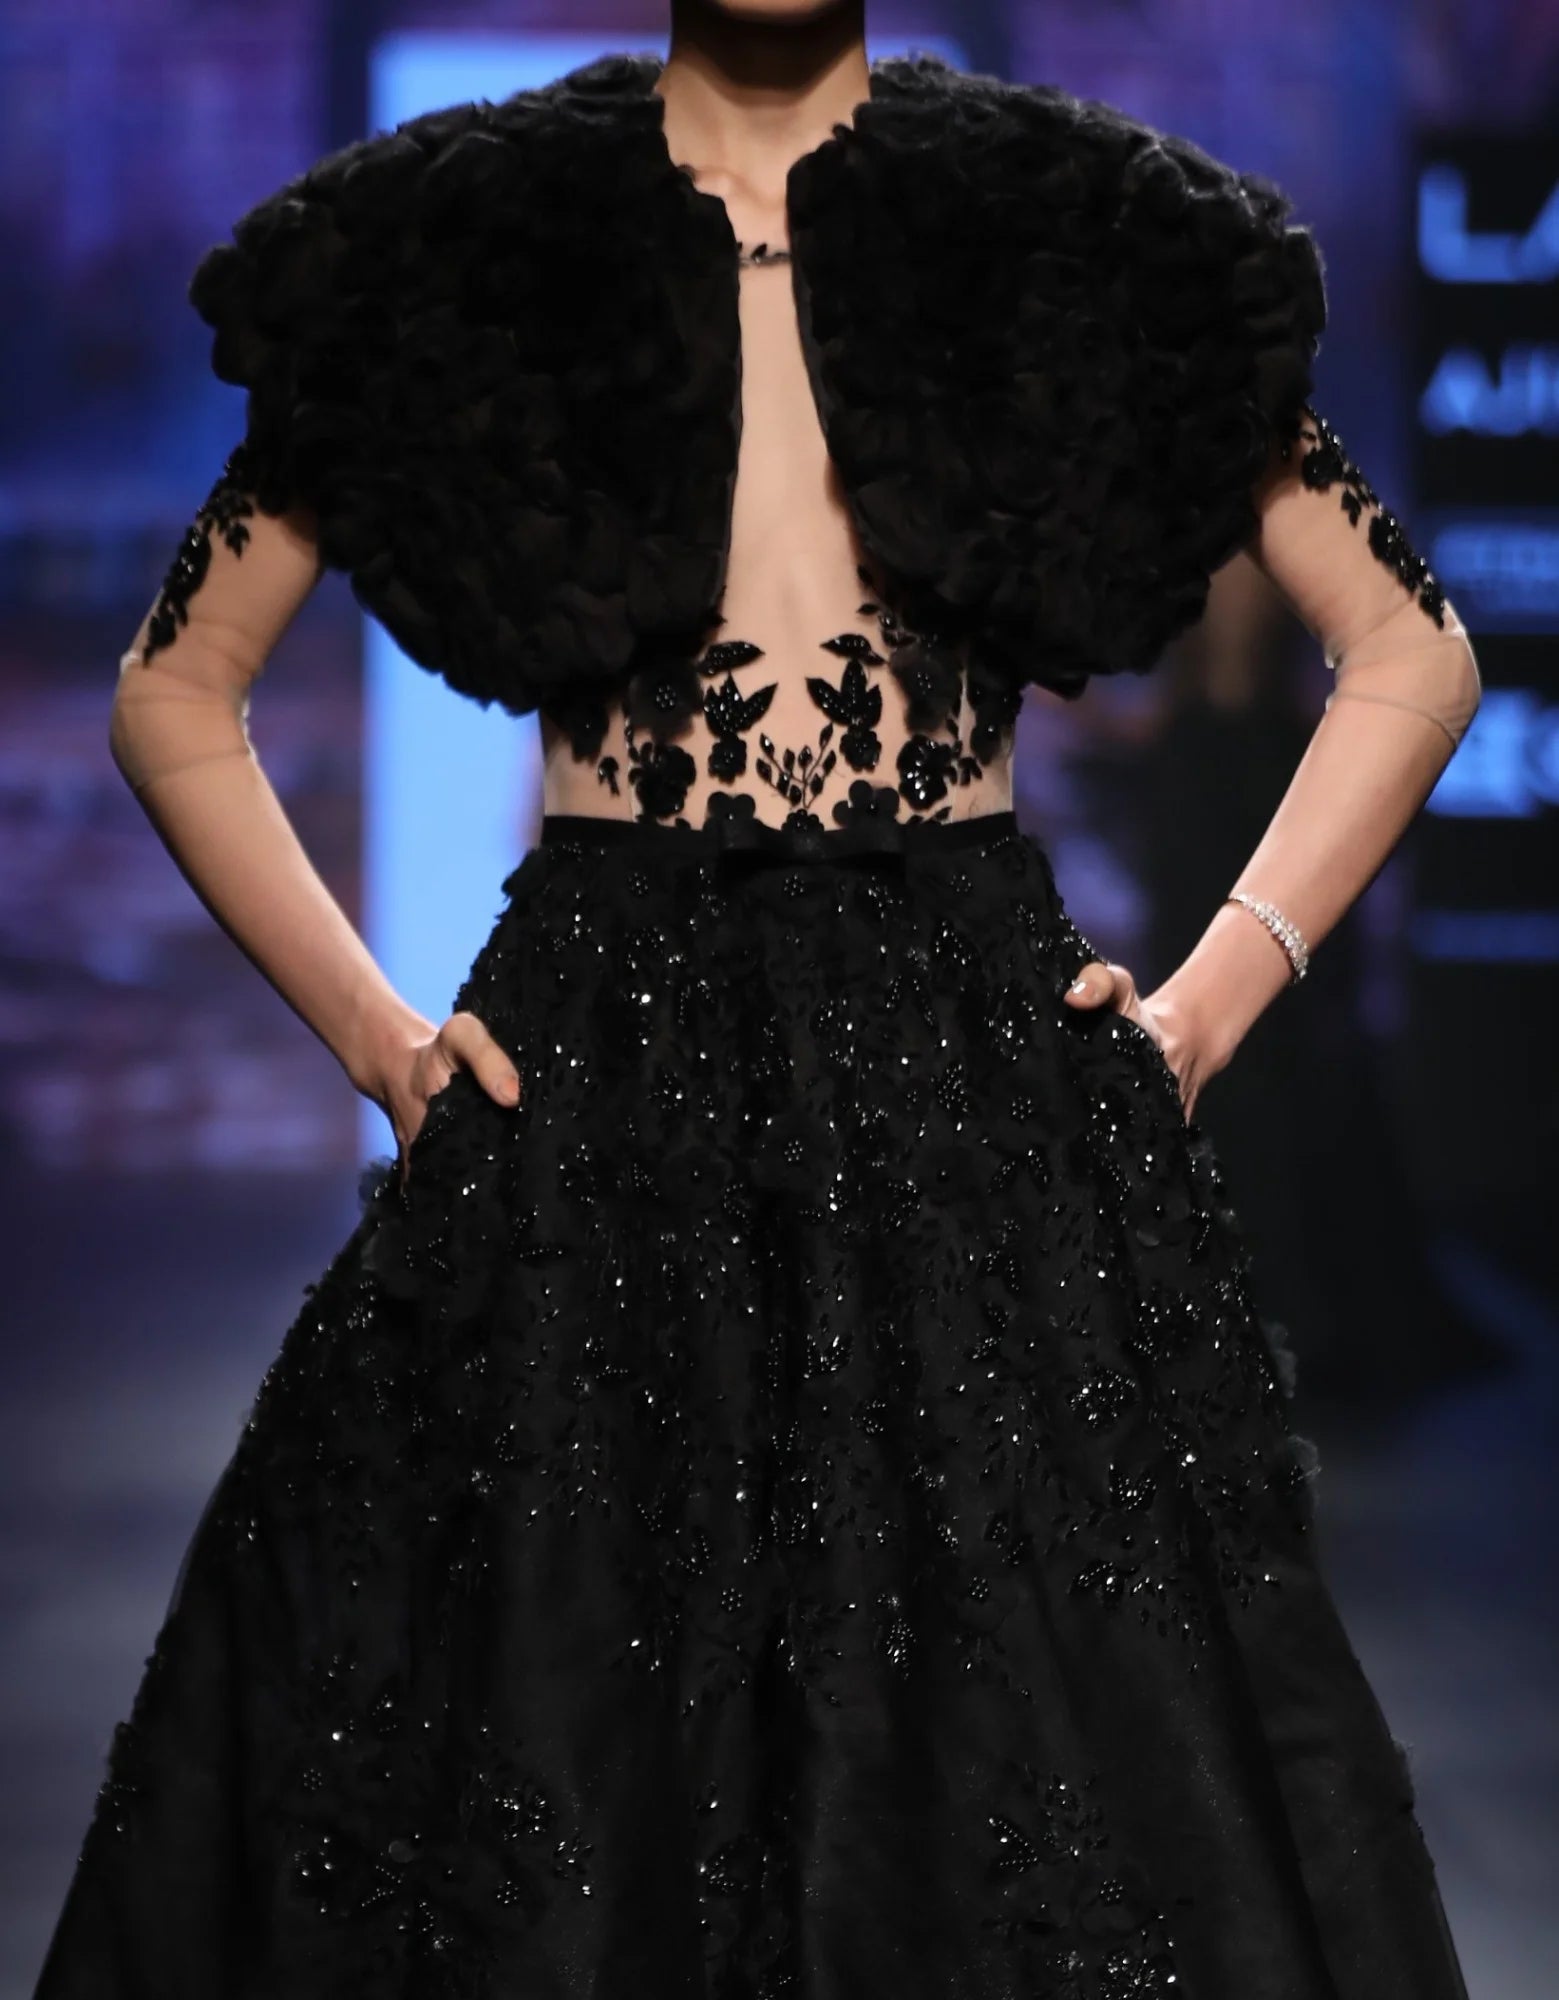 Black Ball Gown Fully Embroidered With Feathers Without Jacket